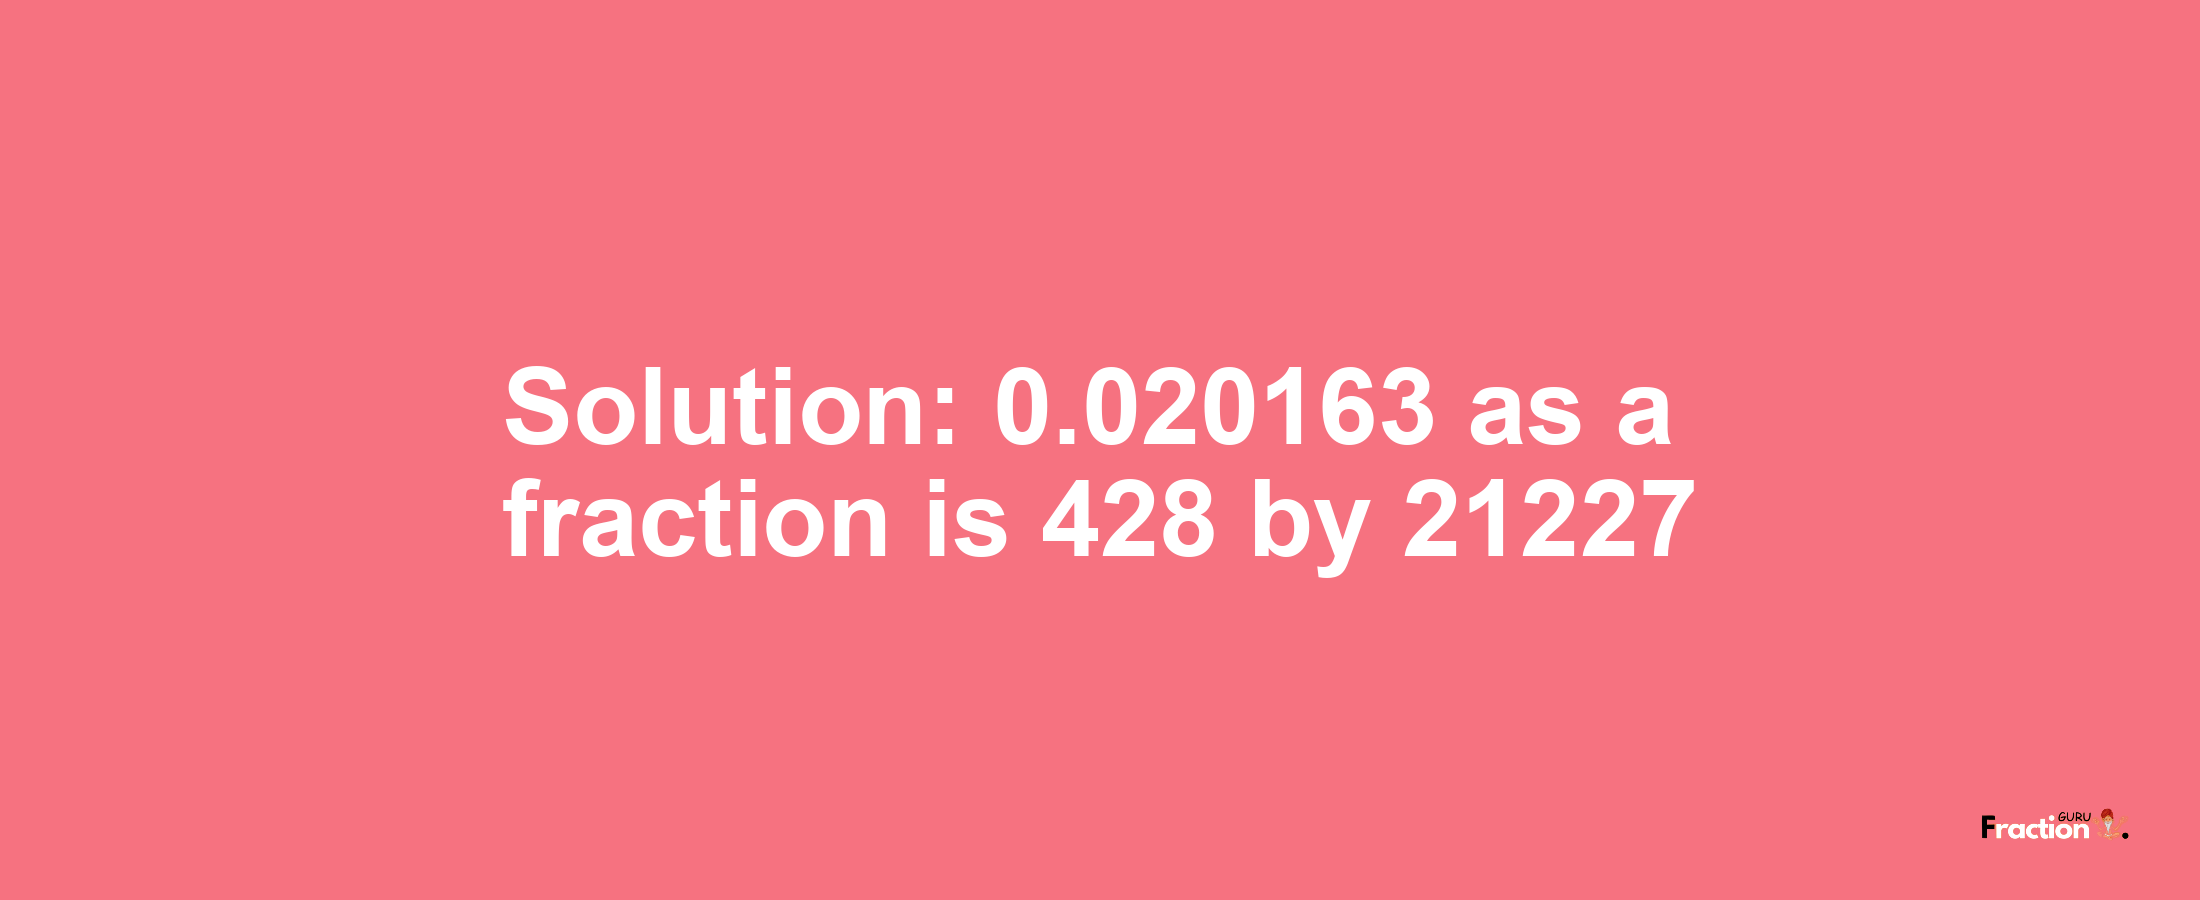 Solution:0.020163 as a fraction is 428/21227